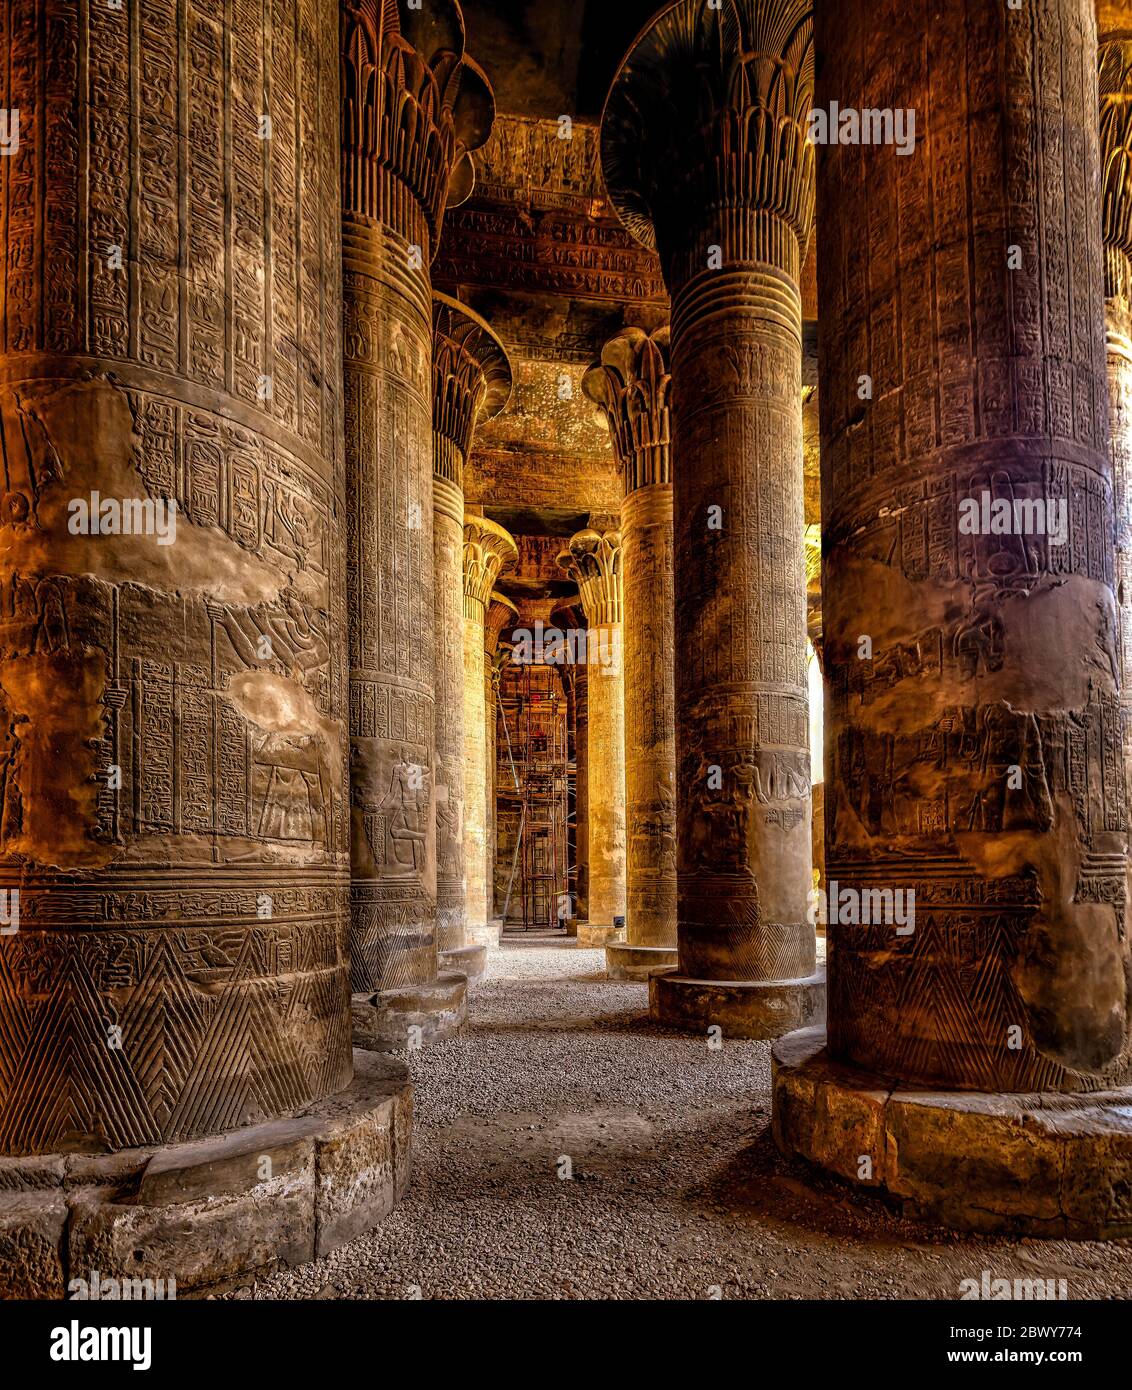 Hypostyle Hall of Khnum temple in Esna, Egypt Stock Photo